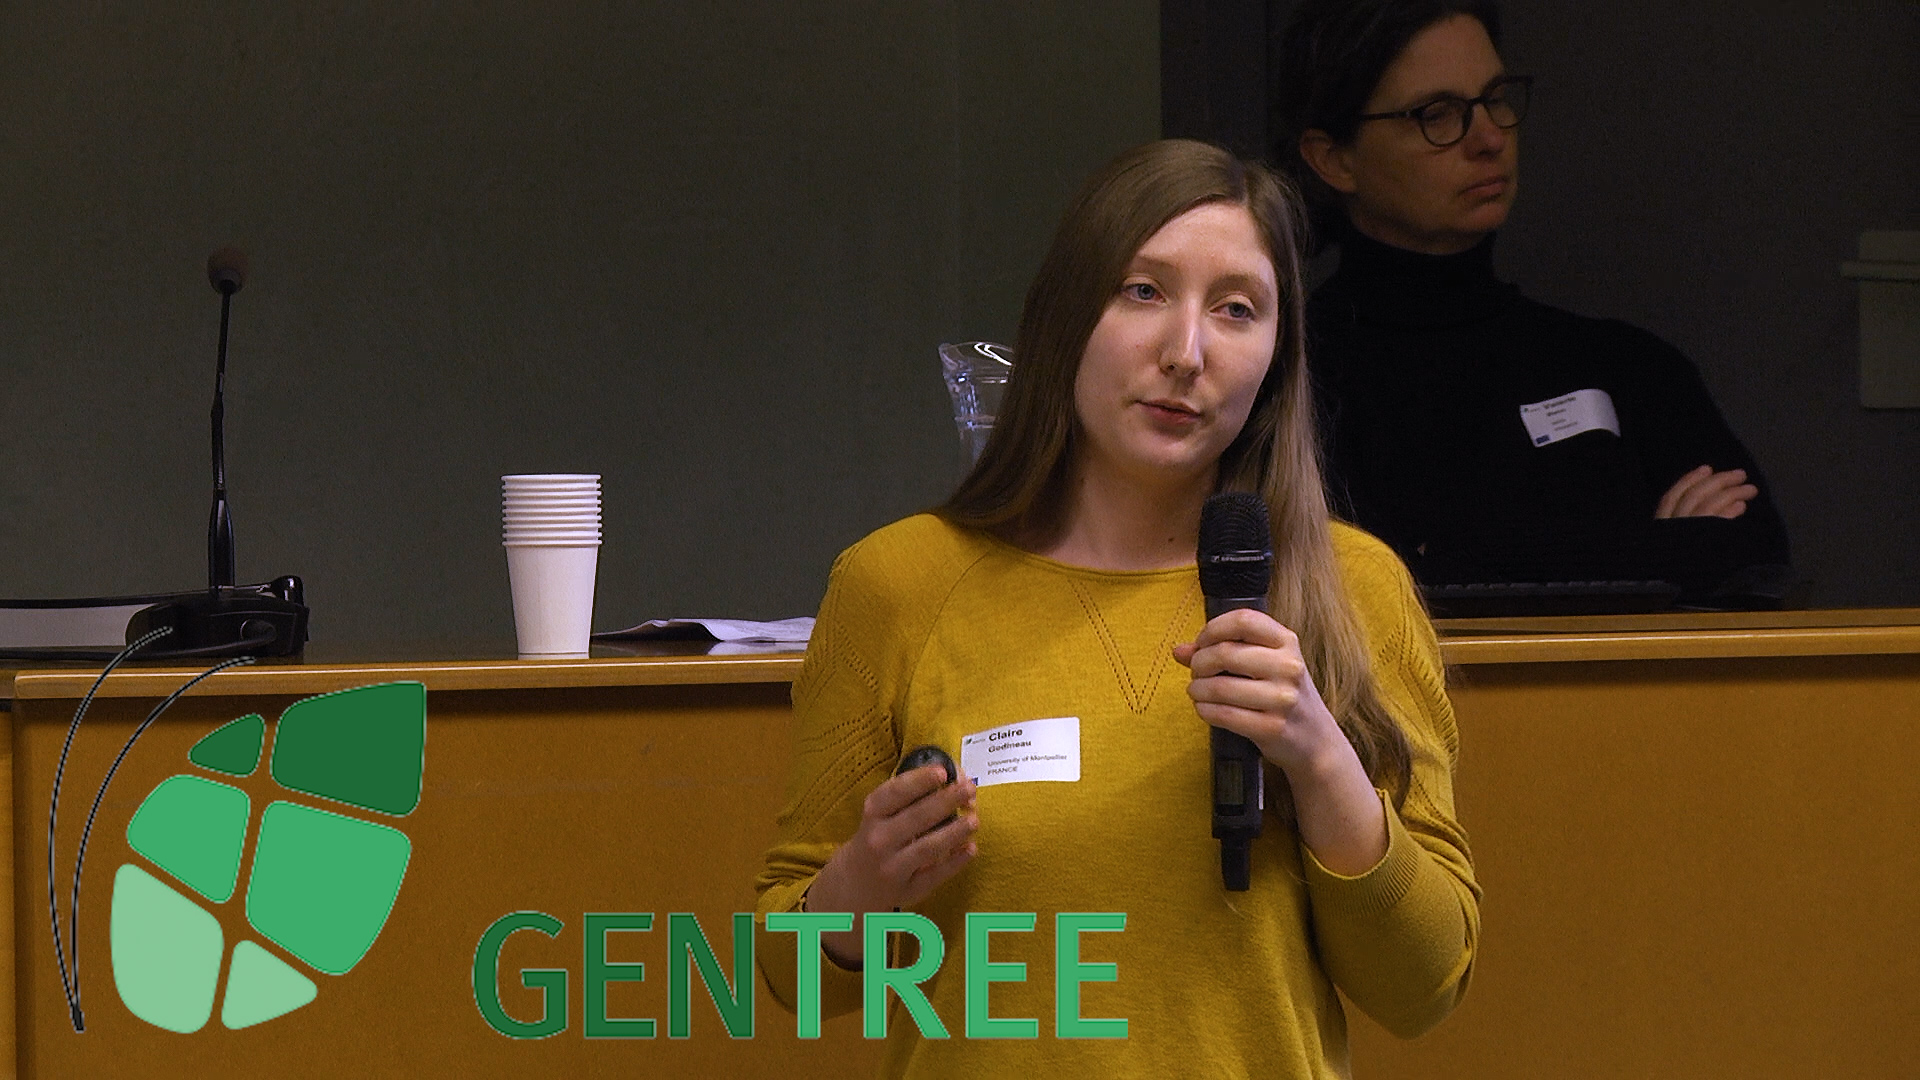 [COLLOQUE] GENTREE Final Conference 27-31 January 2020 séance 15